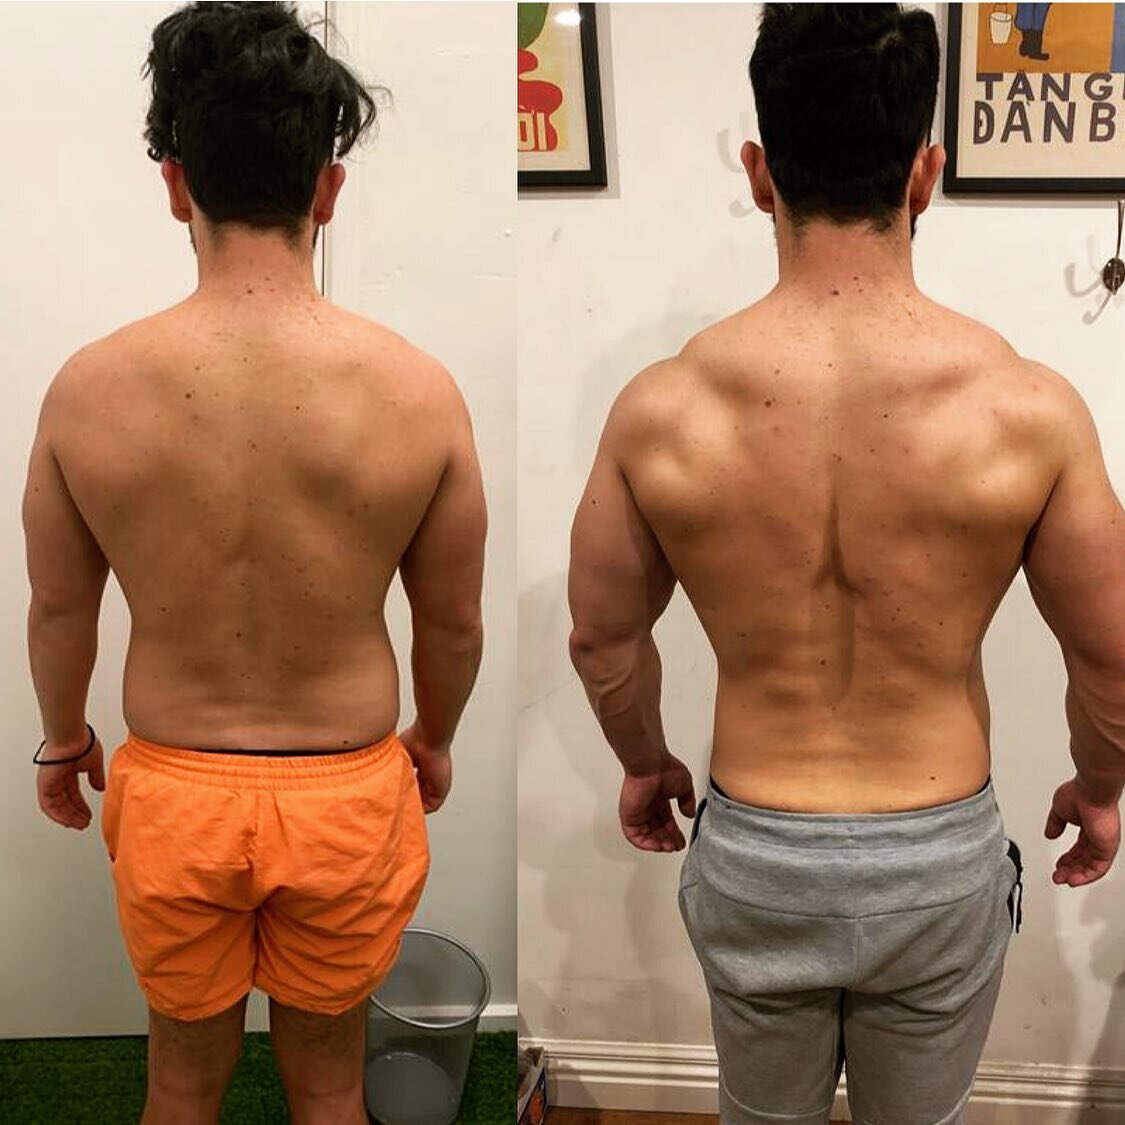 6 weeks.

Our boy @sybahar showing solid progress from the back.

Equipment used:
A pair of dumbbells.
A set of resistance bands.
@unsettledpetal used as an anchor for said resistance bands 😂

Get up off the couch and start now. If you’re not sure w